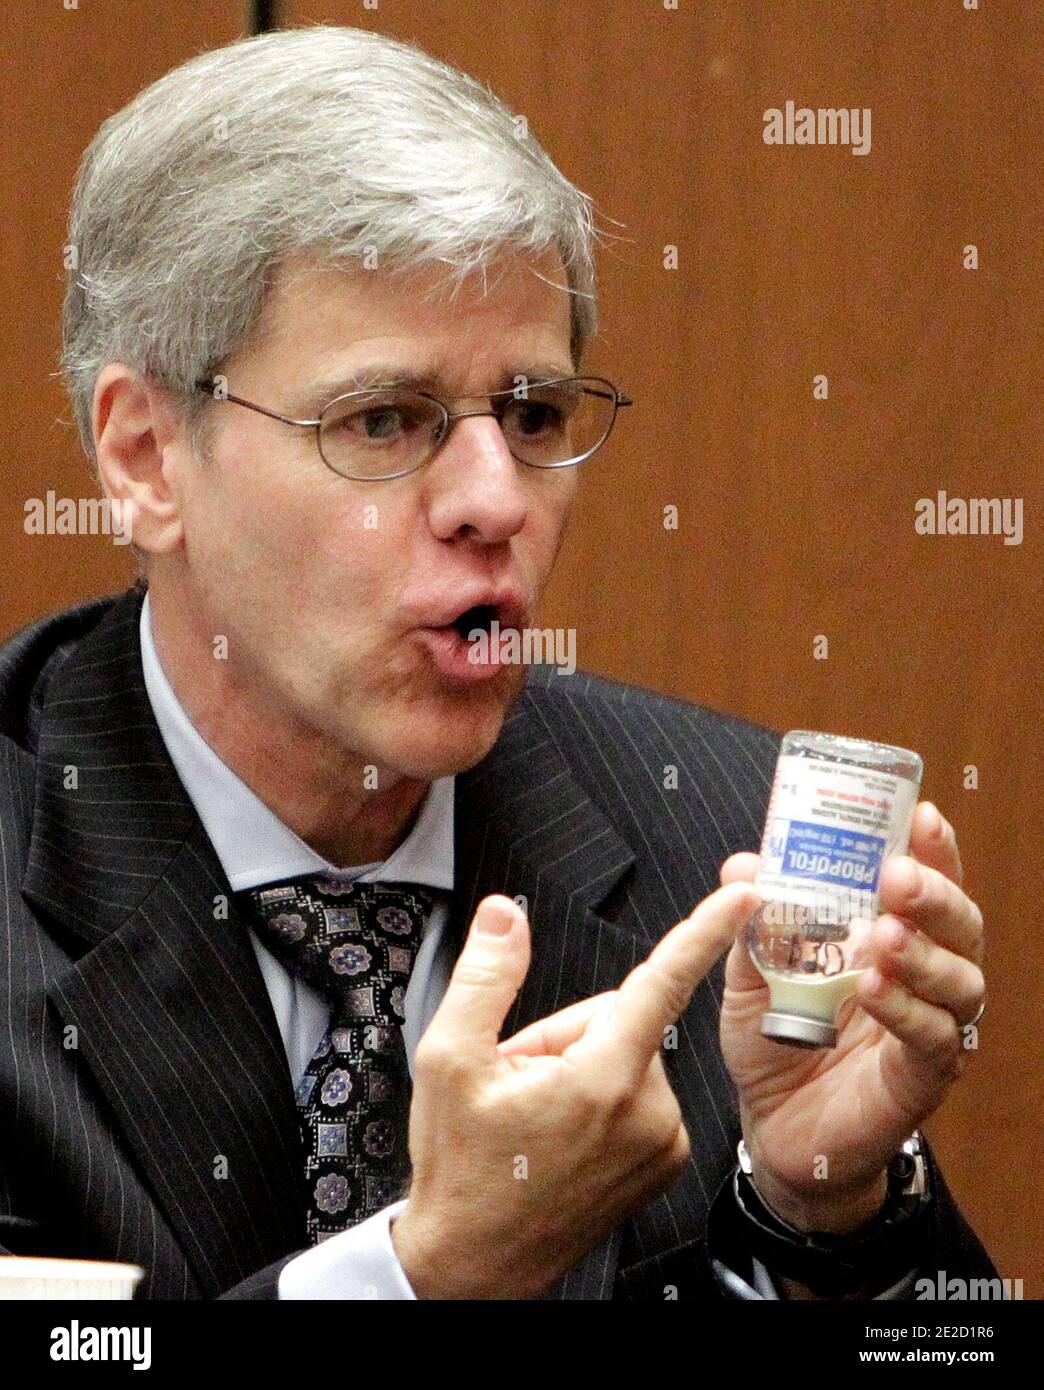 Anesthesiology expert Dr. Steven Shafer gestures to a Propofol bottle during Dr. Conrad Murray's involuntary manslaughter trial in downtown Los Angeles on October 19, 2011. Murray has pleaded not guilty and faces four years in prison and the loss of his medical license if convicted of involuntary manslaughter in Michael Jackson's death. Photo by Reed Saxon/Pool/ABACAPRESS.COM Stock Photo